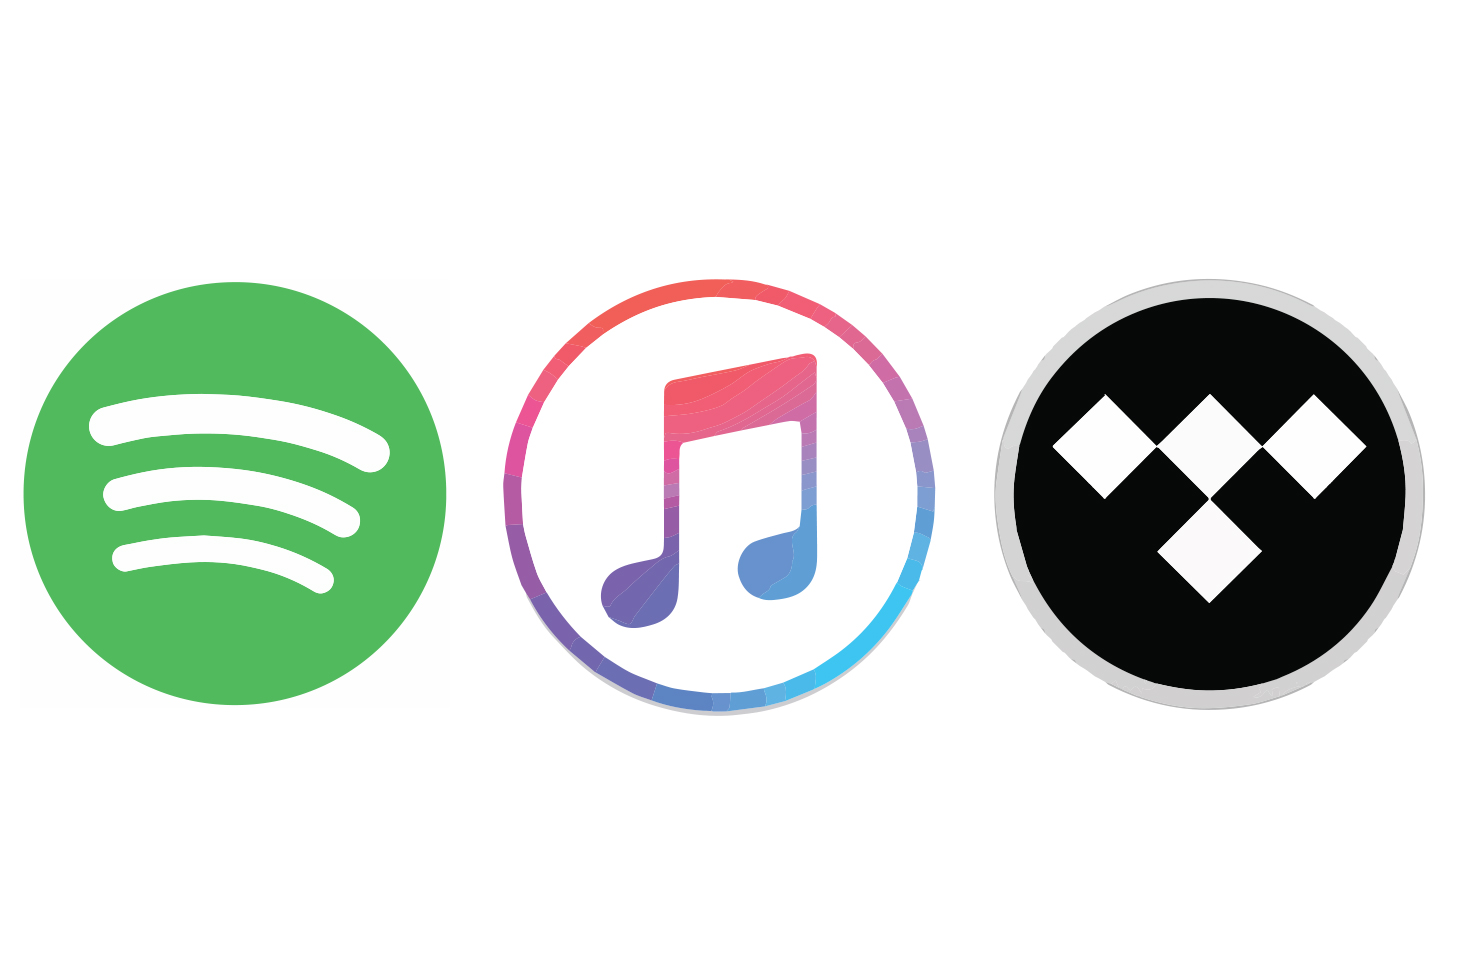 Build android app to stream apple music and spotify playlists